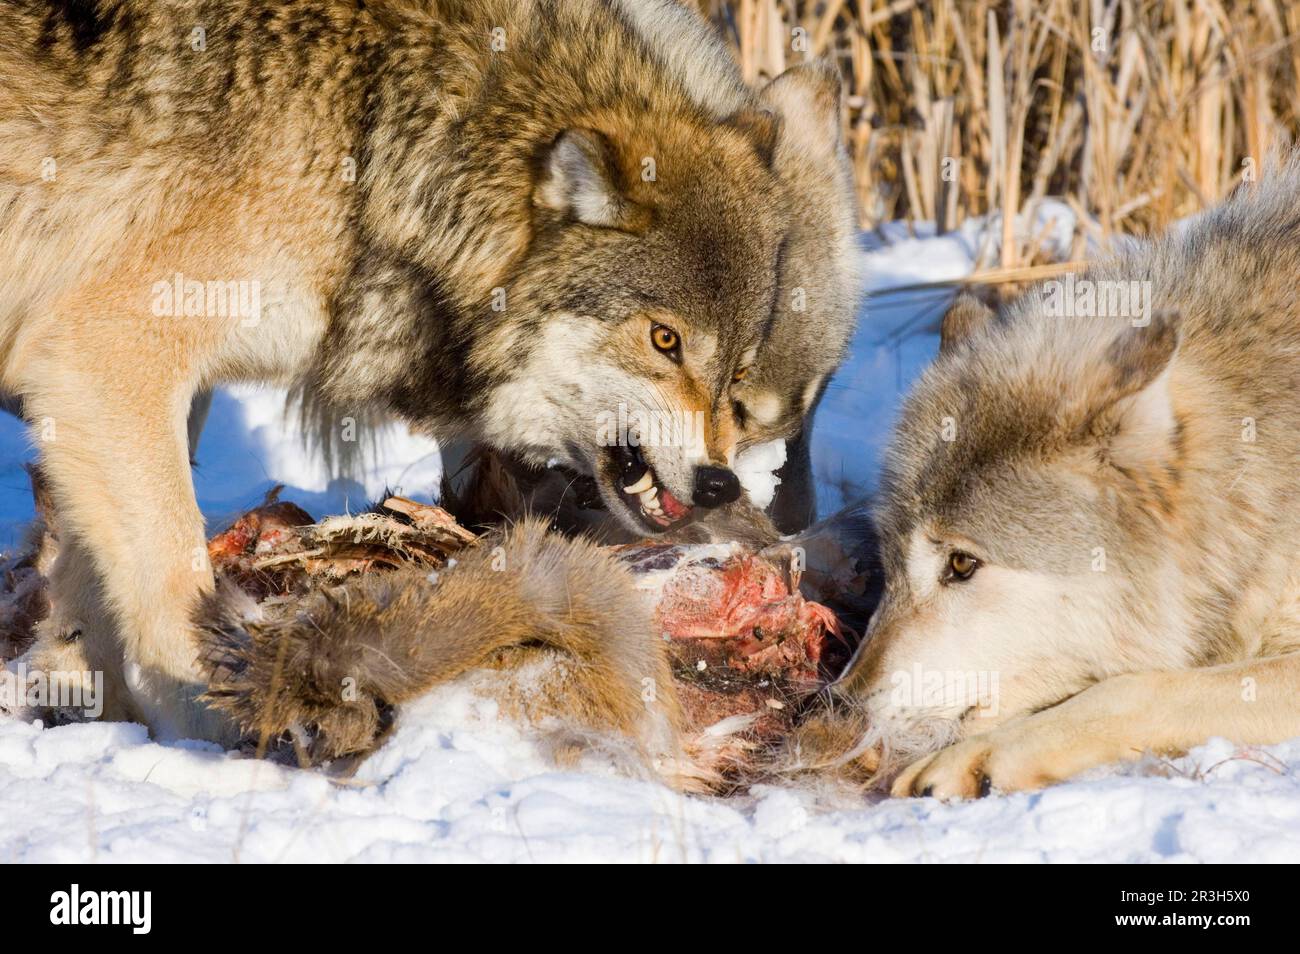 Wolf, gray wolves (Canis lupus), canine species, predators, mammals, animals, Grey Wolf adults, feeding, dominance interaction at kill in snow Stock Photo